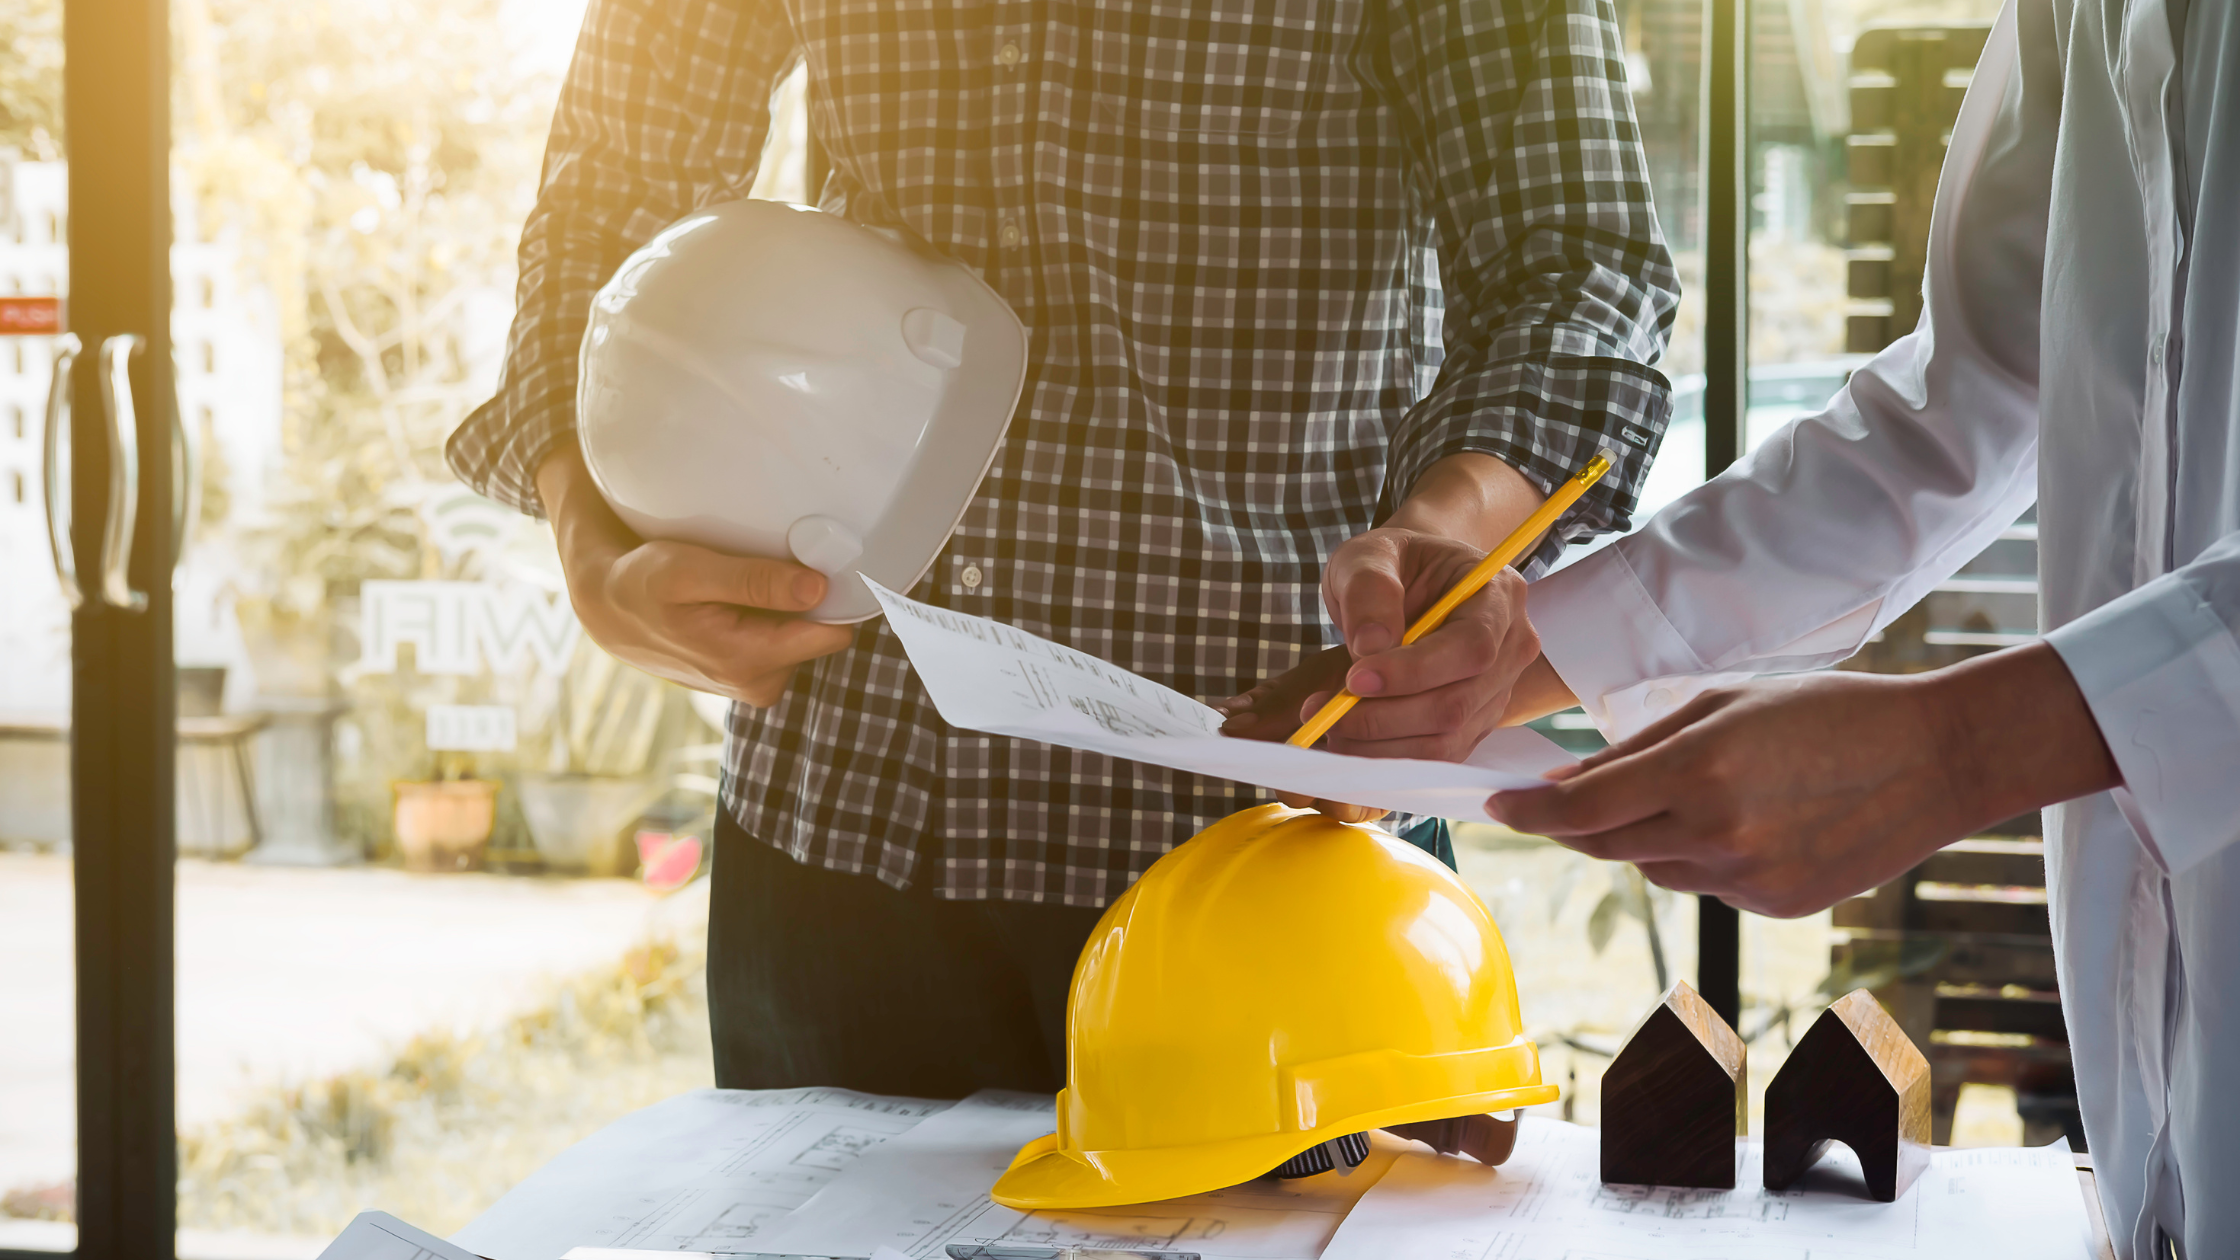 Client Relations: Building Strong and Lasting Partnerships in the Construction Industry